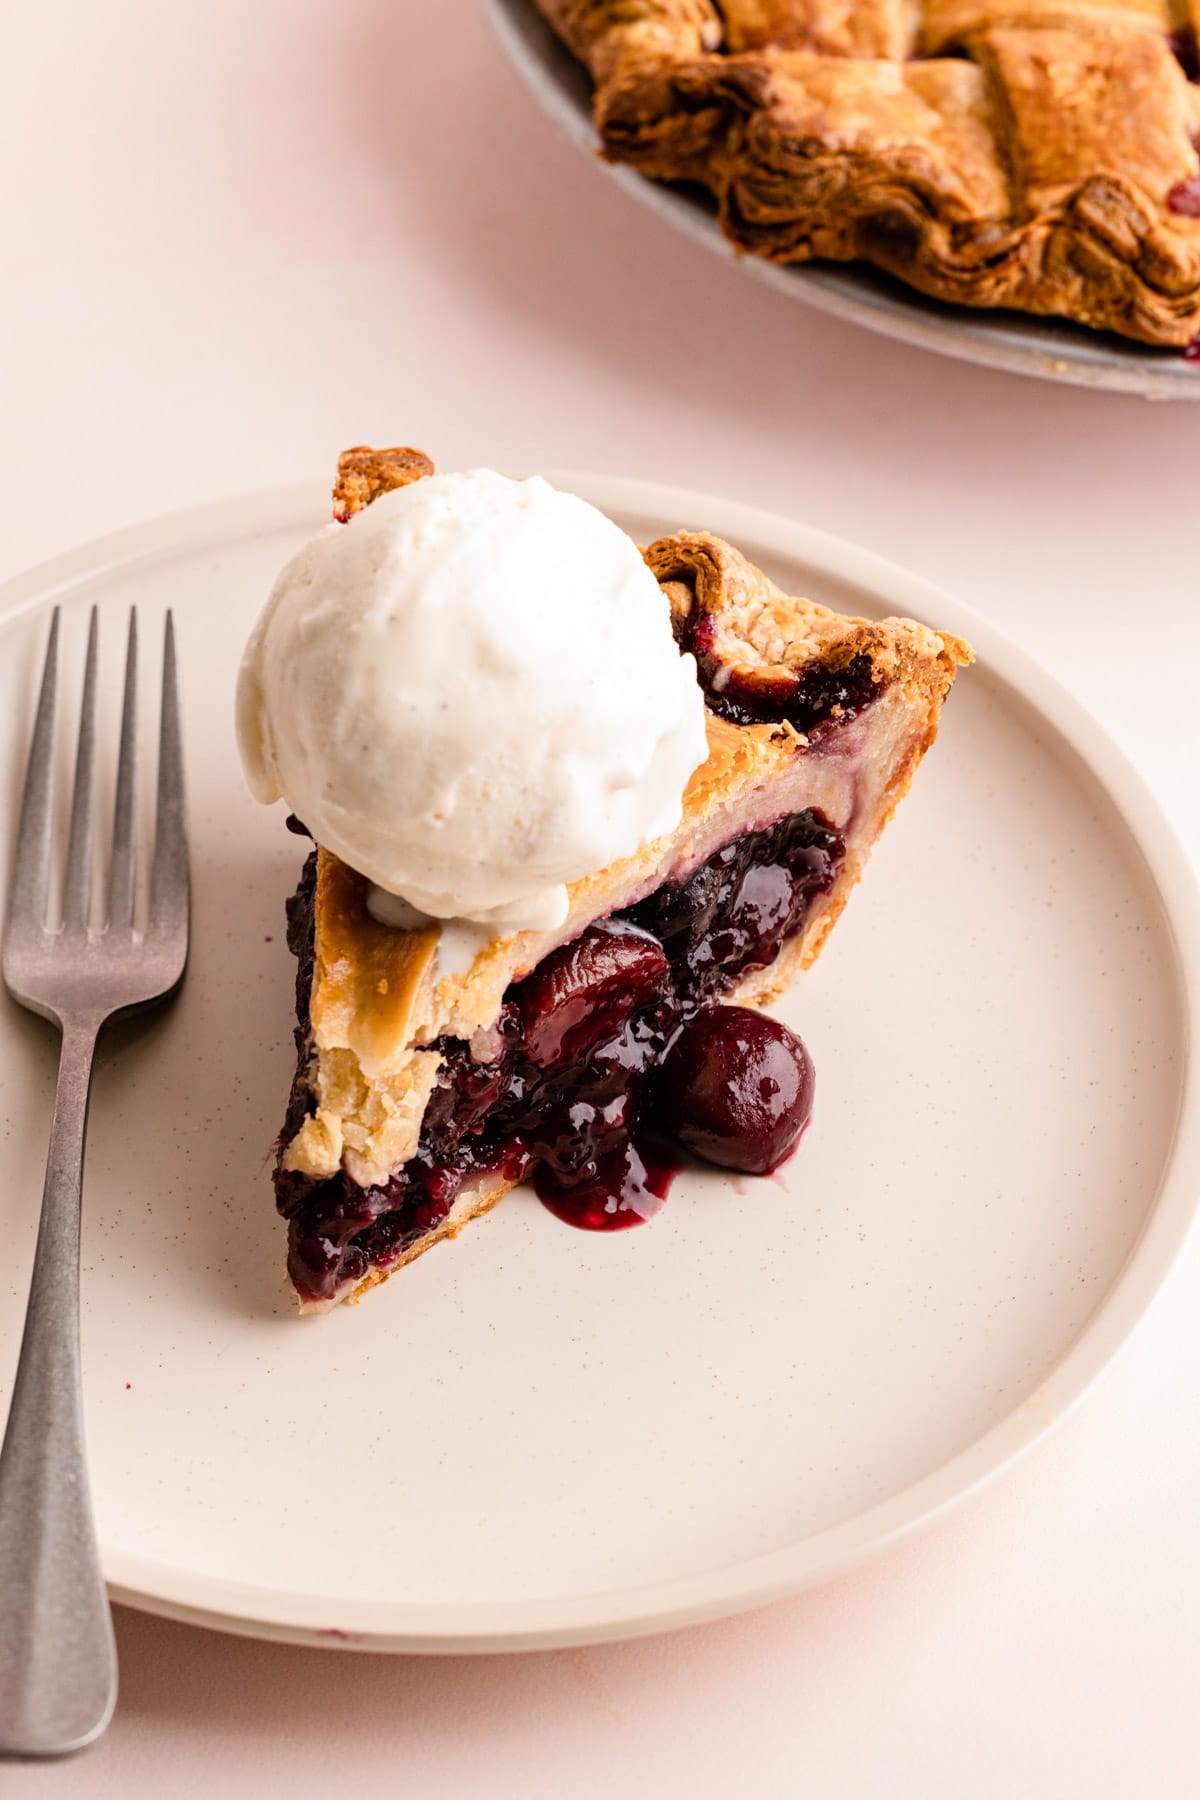 A slice of sweet cherry pie made with frozen cherries.